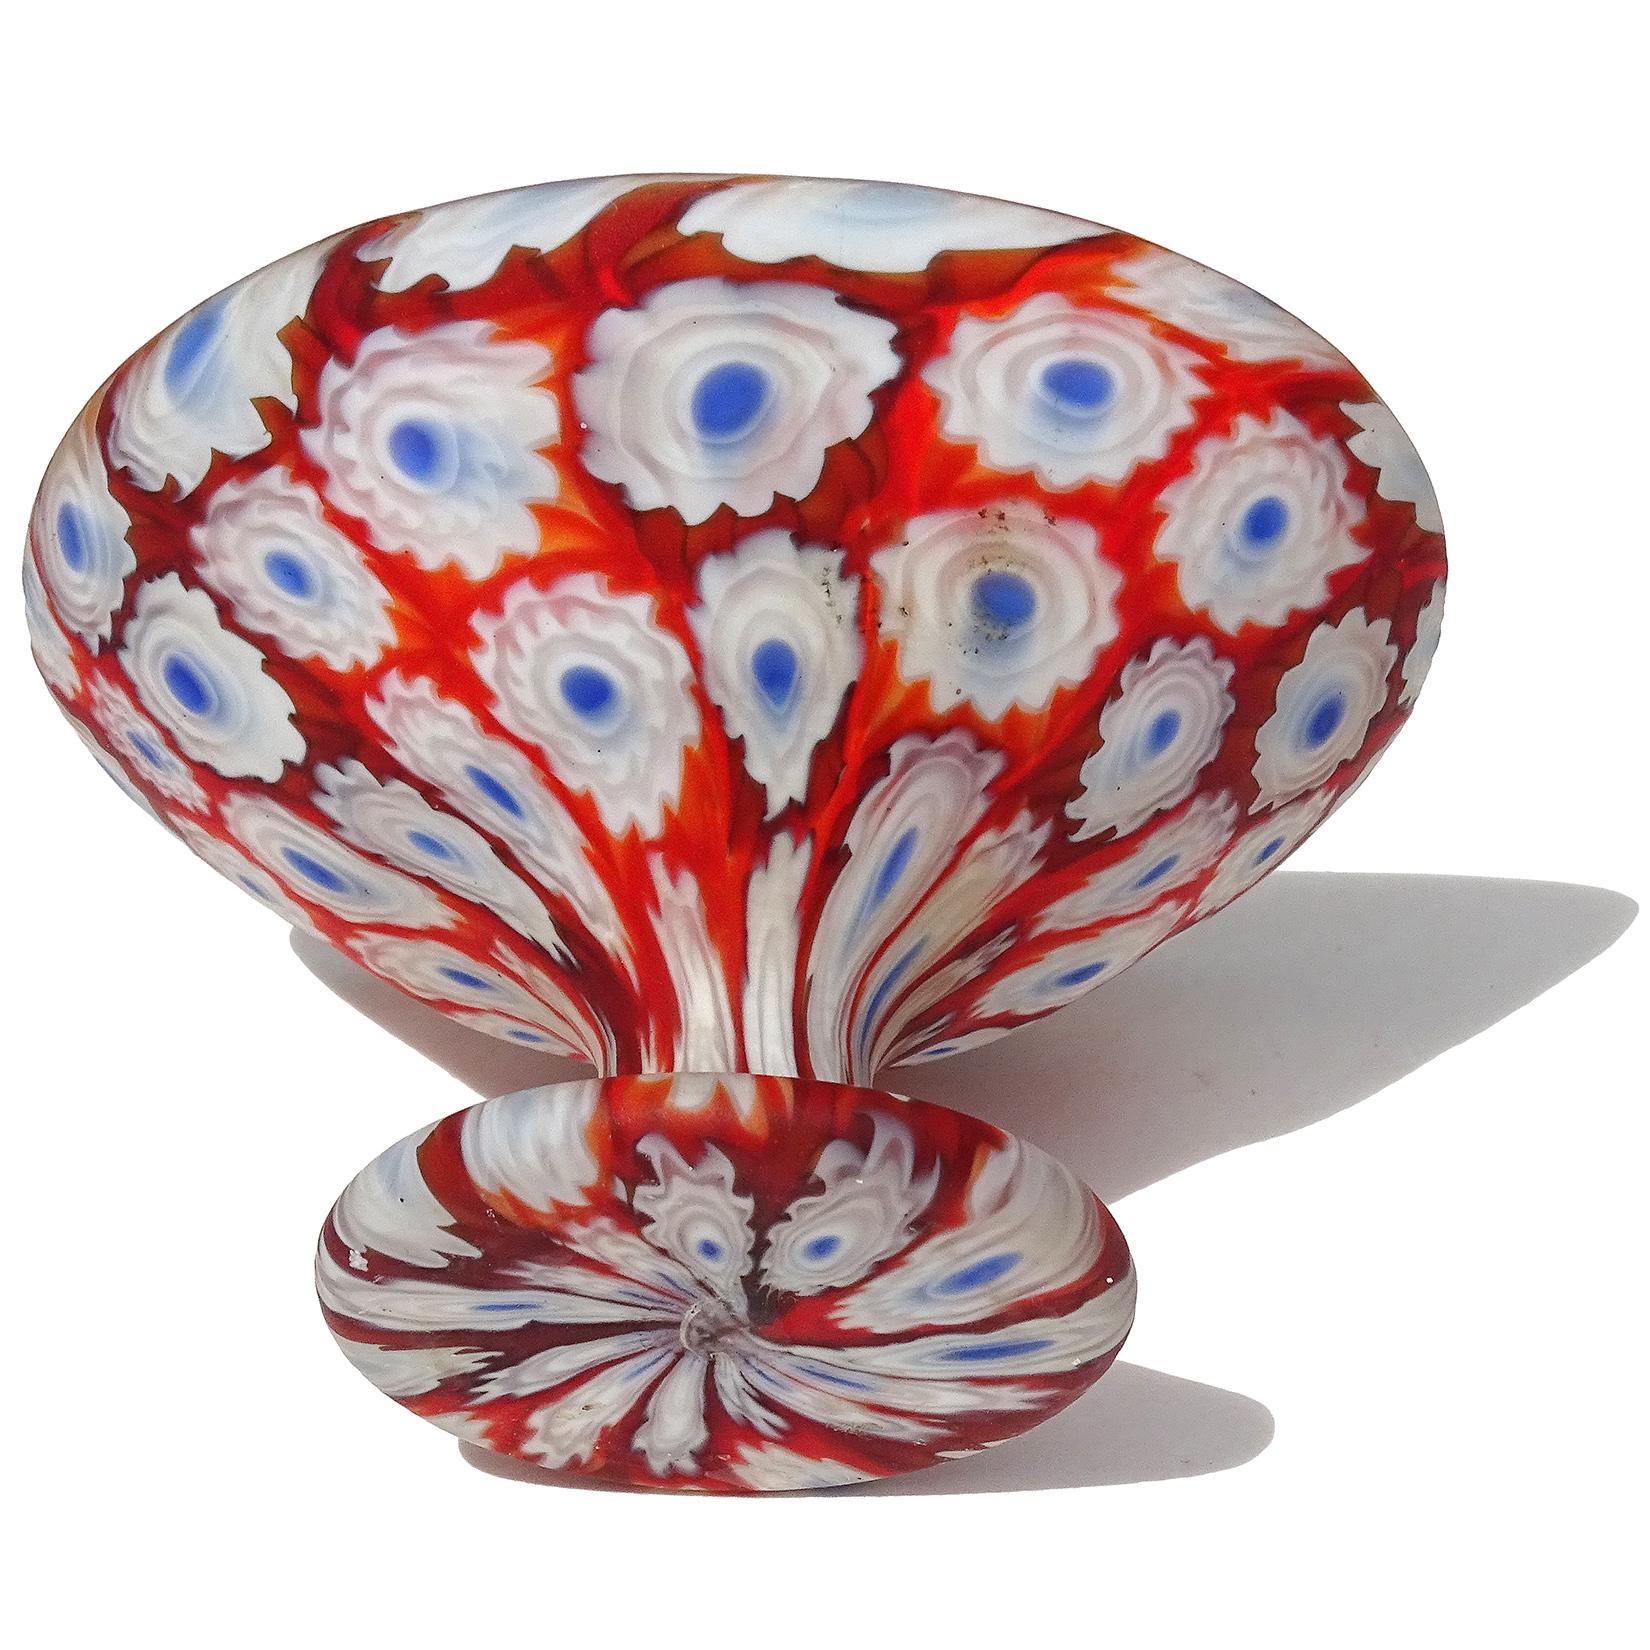 Fratelli Toso Murano Millefiori Flower Mosaic Italian Art Glass Footed Cup In Good Condition For Sale In Kissimmee, FL